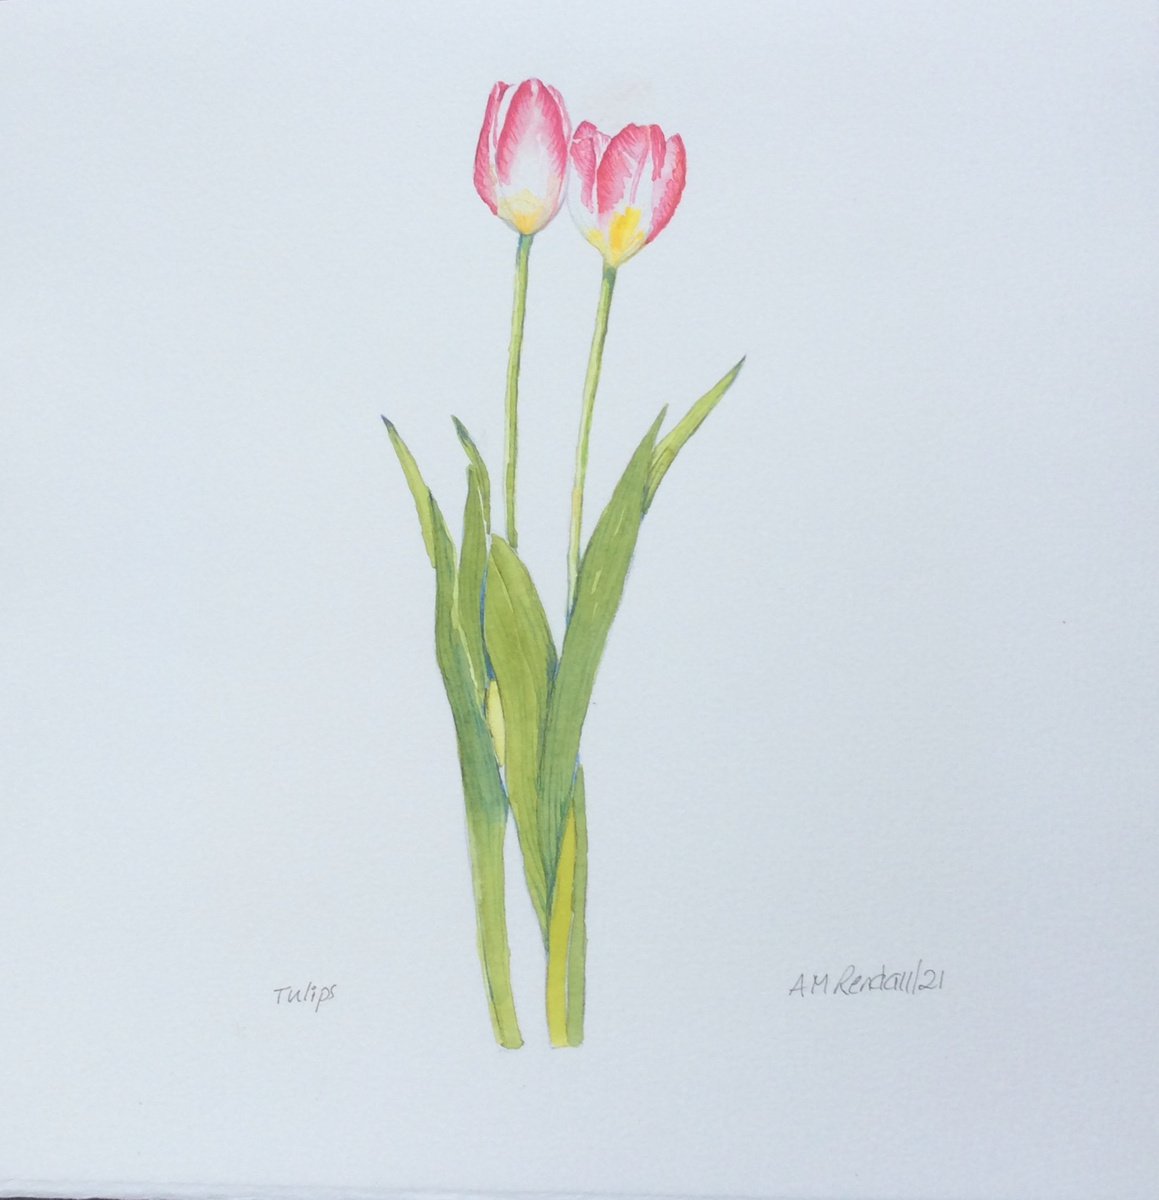 Tulips by Angela Rendall